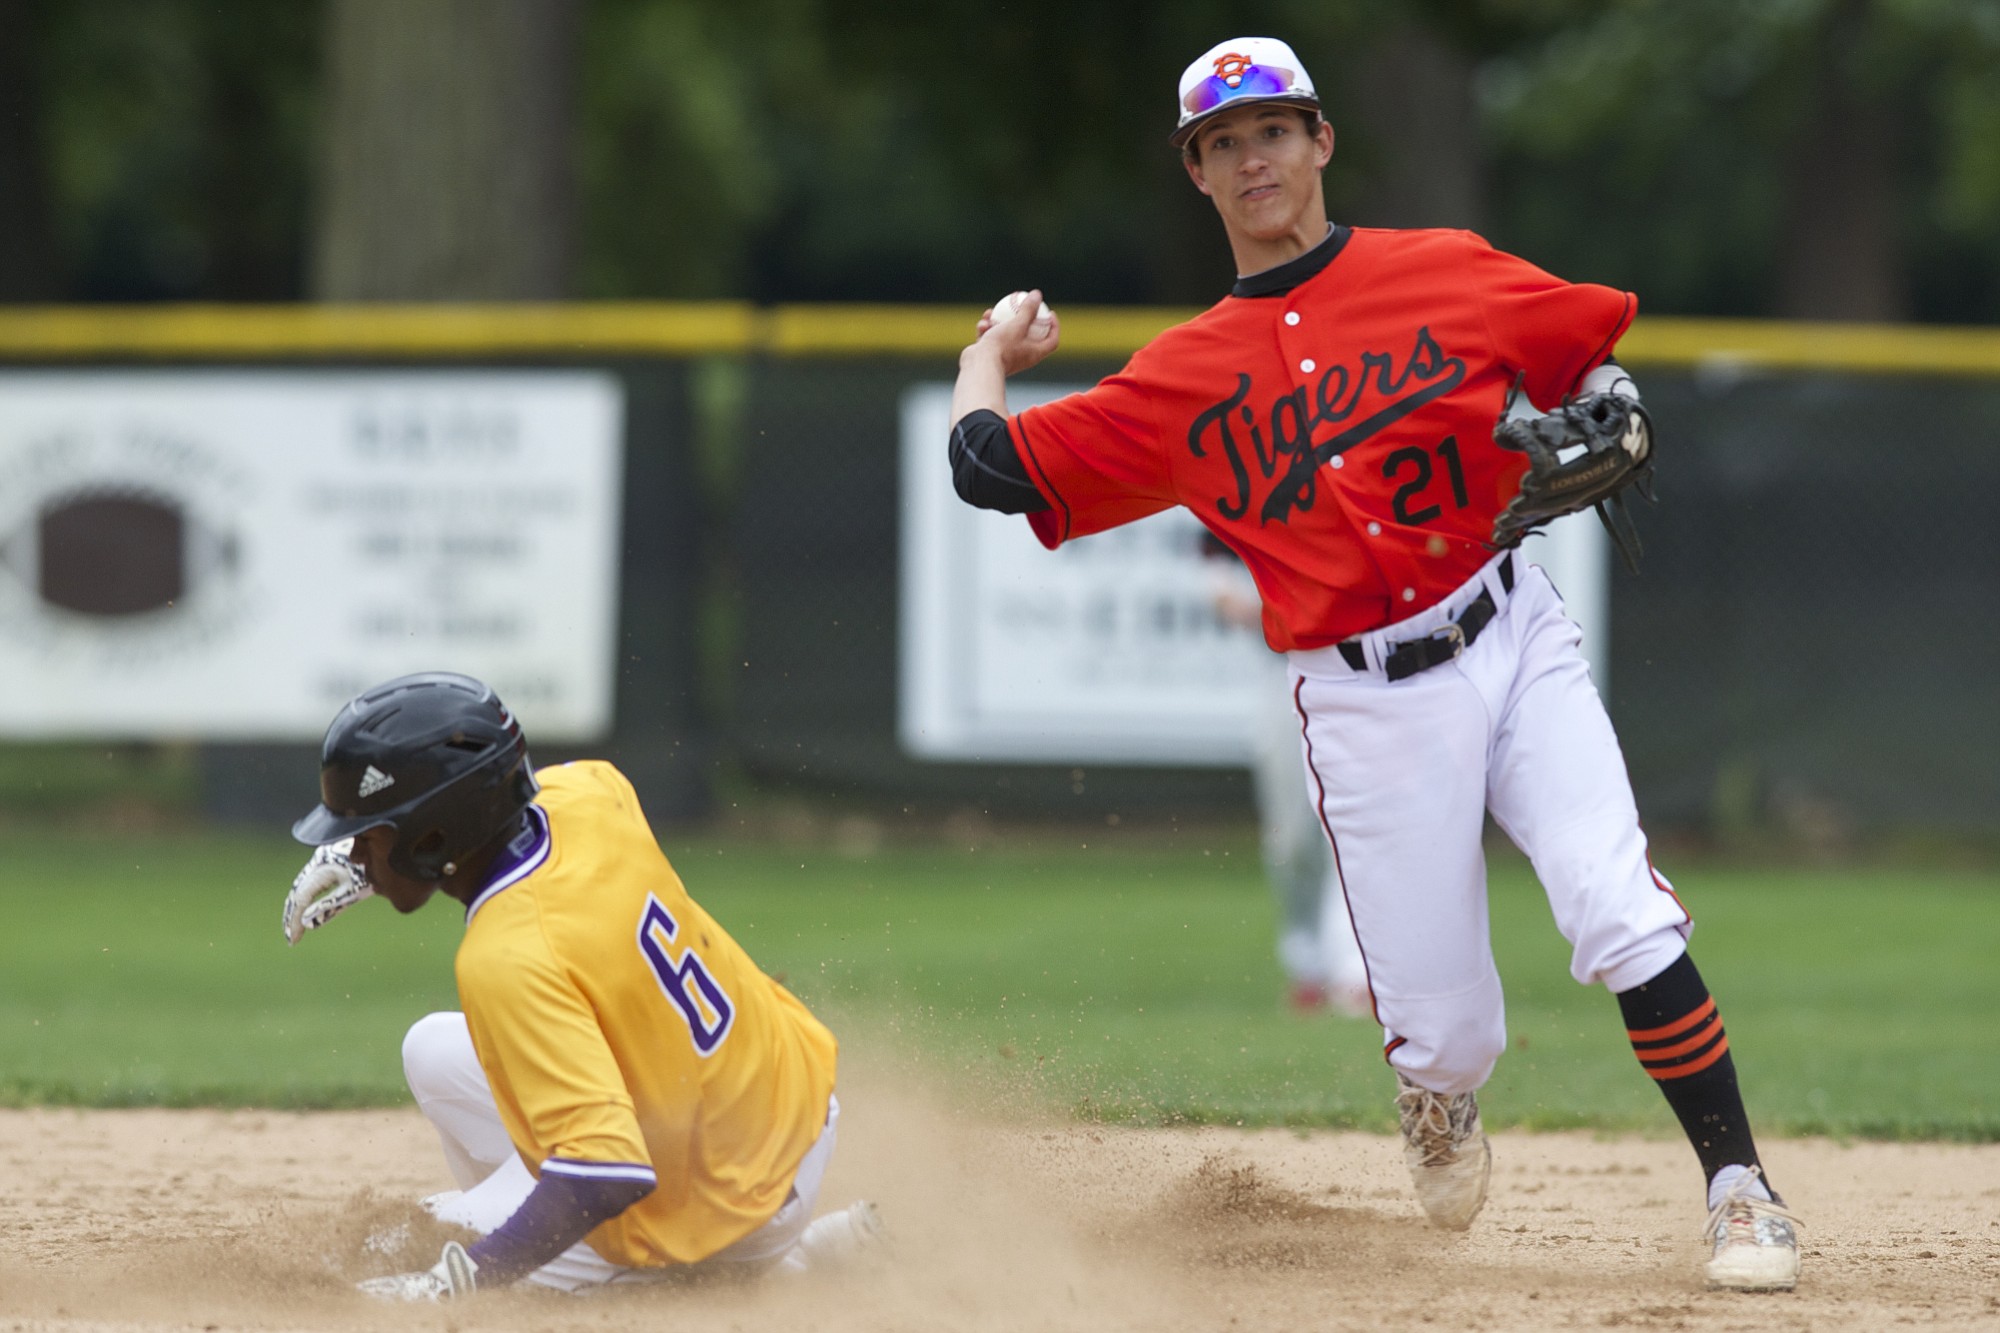 Battle Ground shortstop Colin Rubino makes a play at second during the Southwest Washington High School all-star baseball game at Propstra Stadium, Wednesday, June 3, 2015.